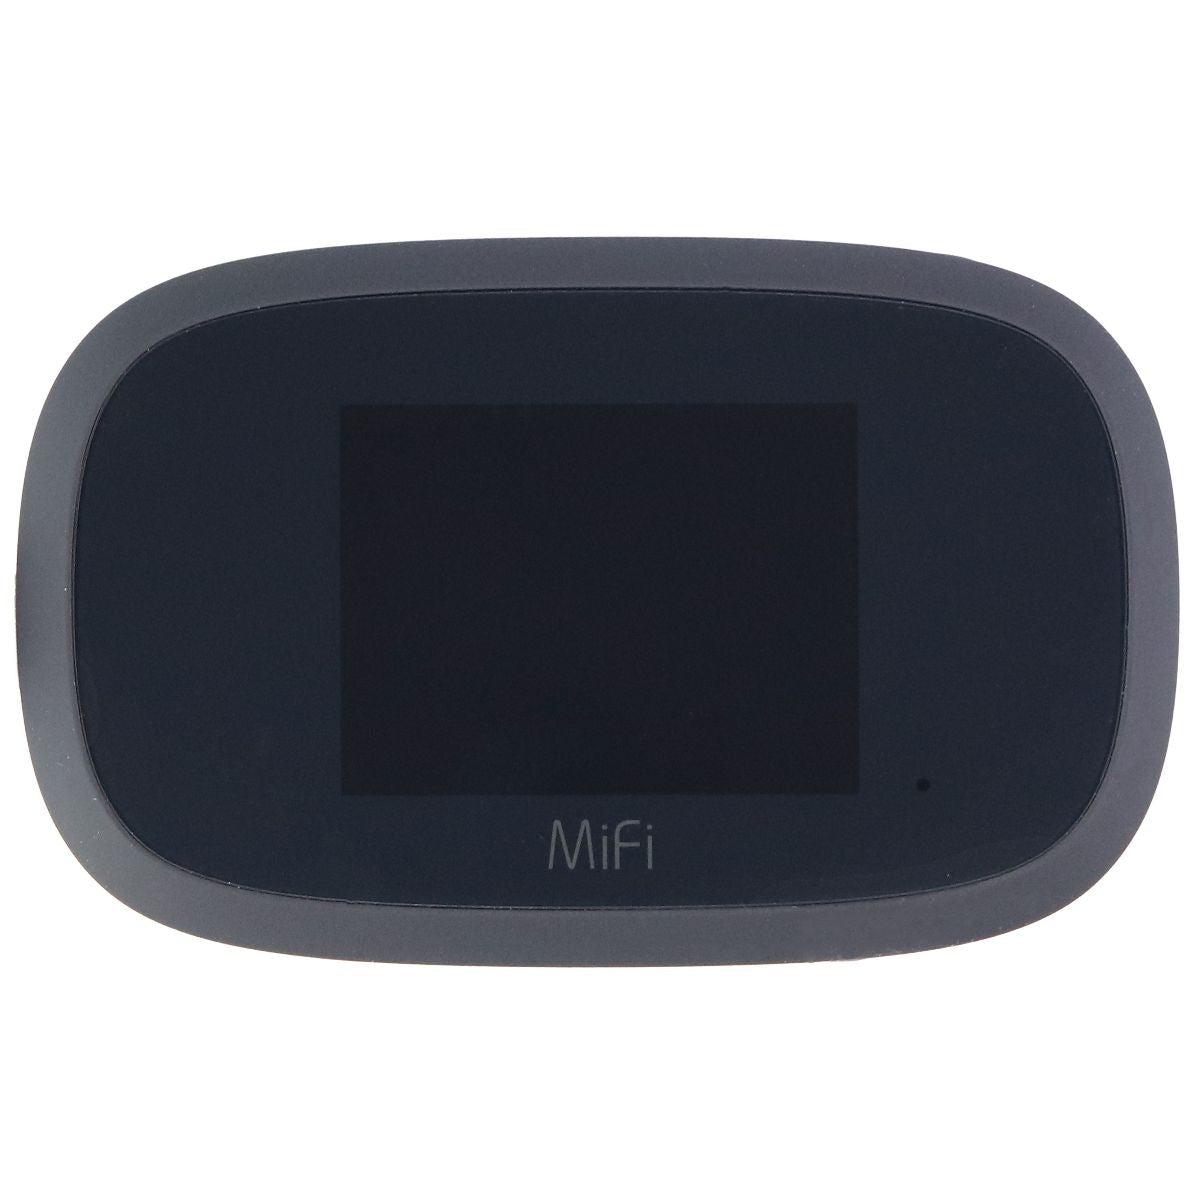 Inseego MiFi 8000 (T-Mobile & AT&T) LTE Mobile Hotspot - Black Networking - Mobile Broadband Devices inseego    - Simple Cell Bulk Wholesale Pricing - USA Seller